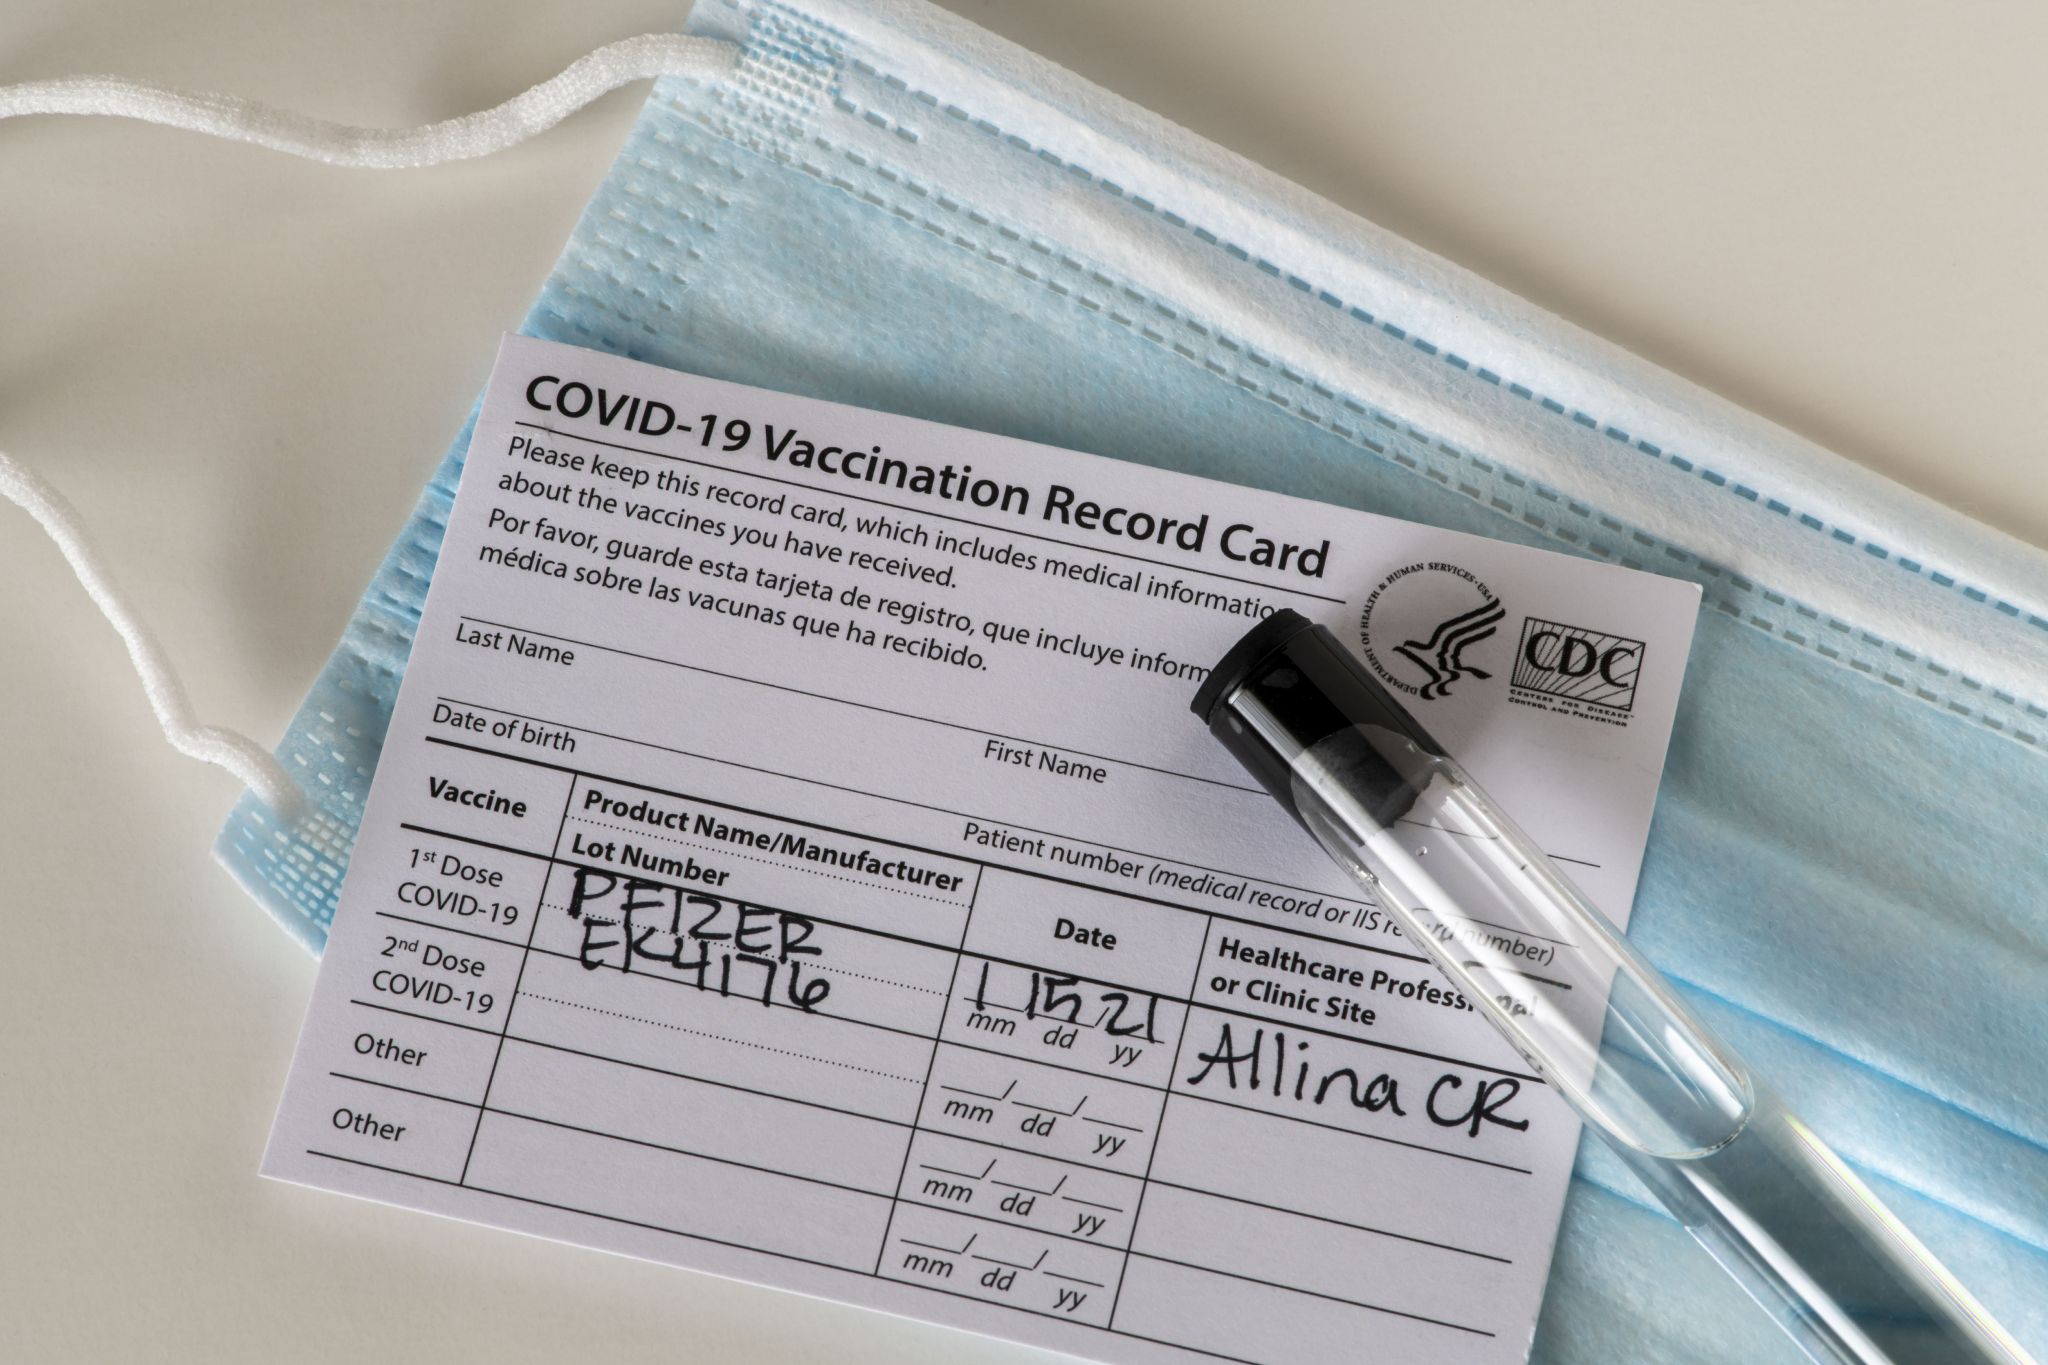 Here's where you can get your COVID19 vaccination card laminated for free